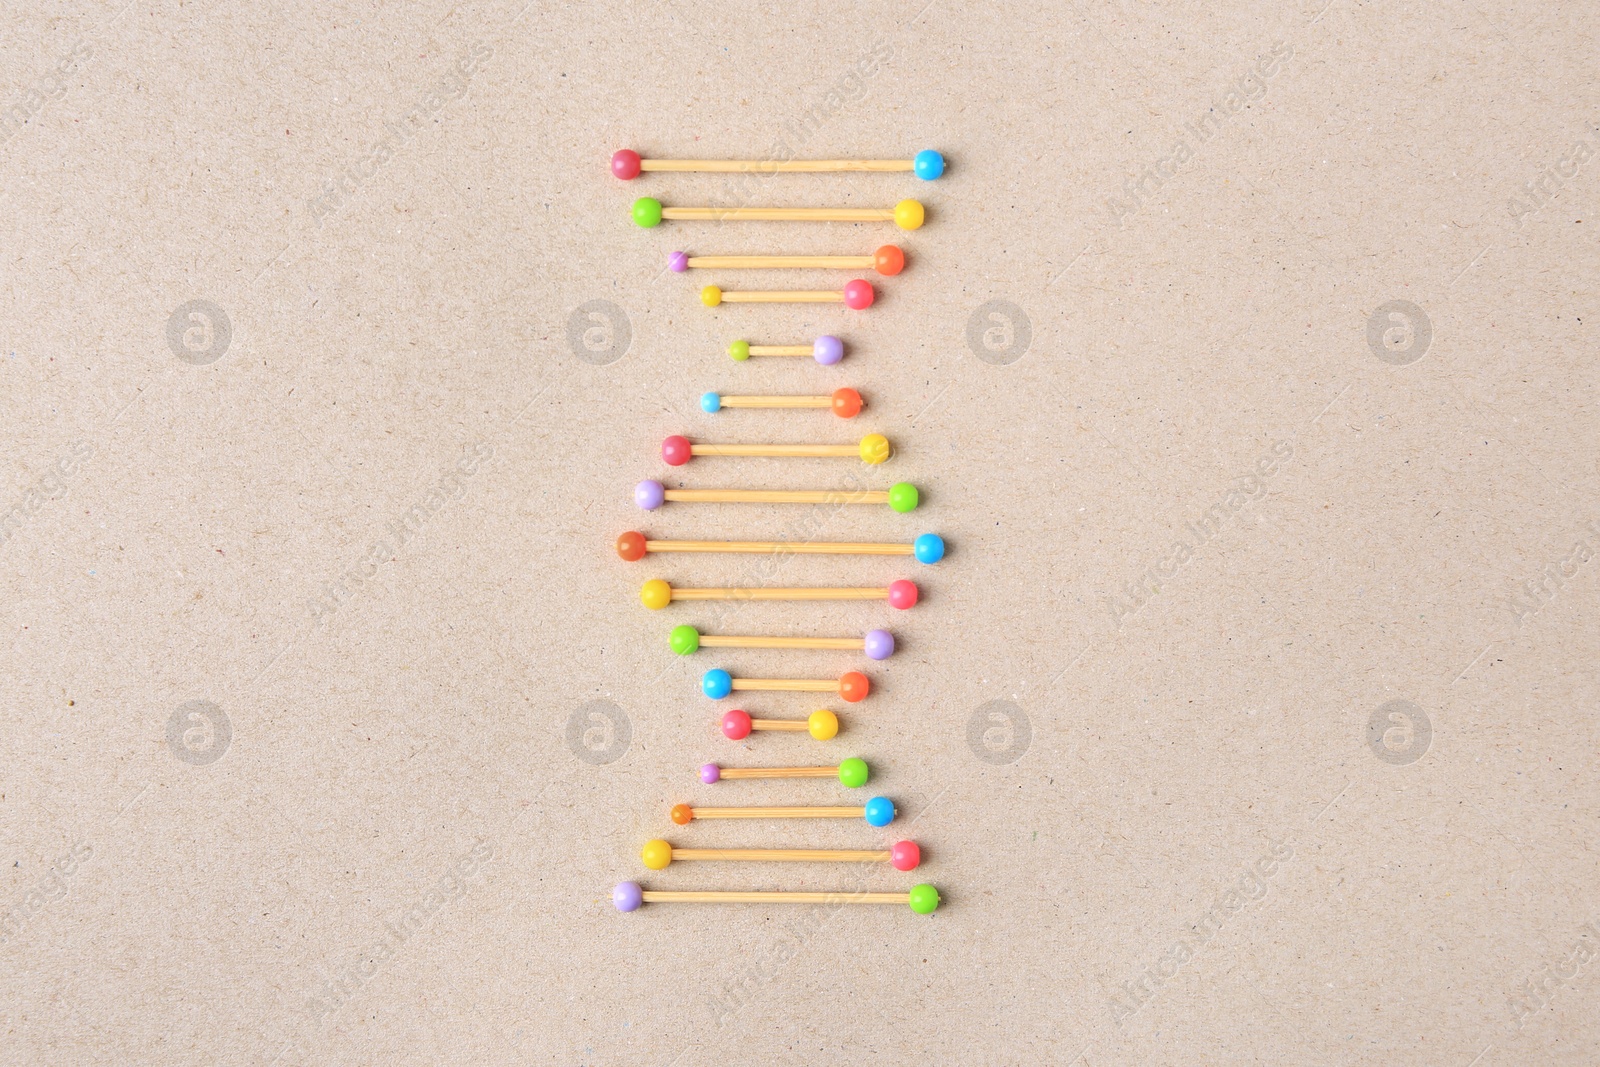 Photo of Model of DNA molecular chain on beige background, top view